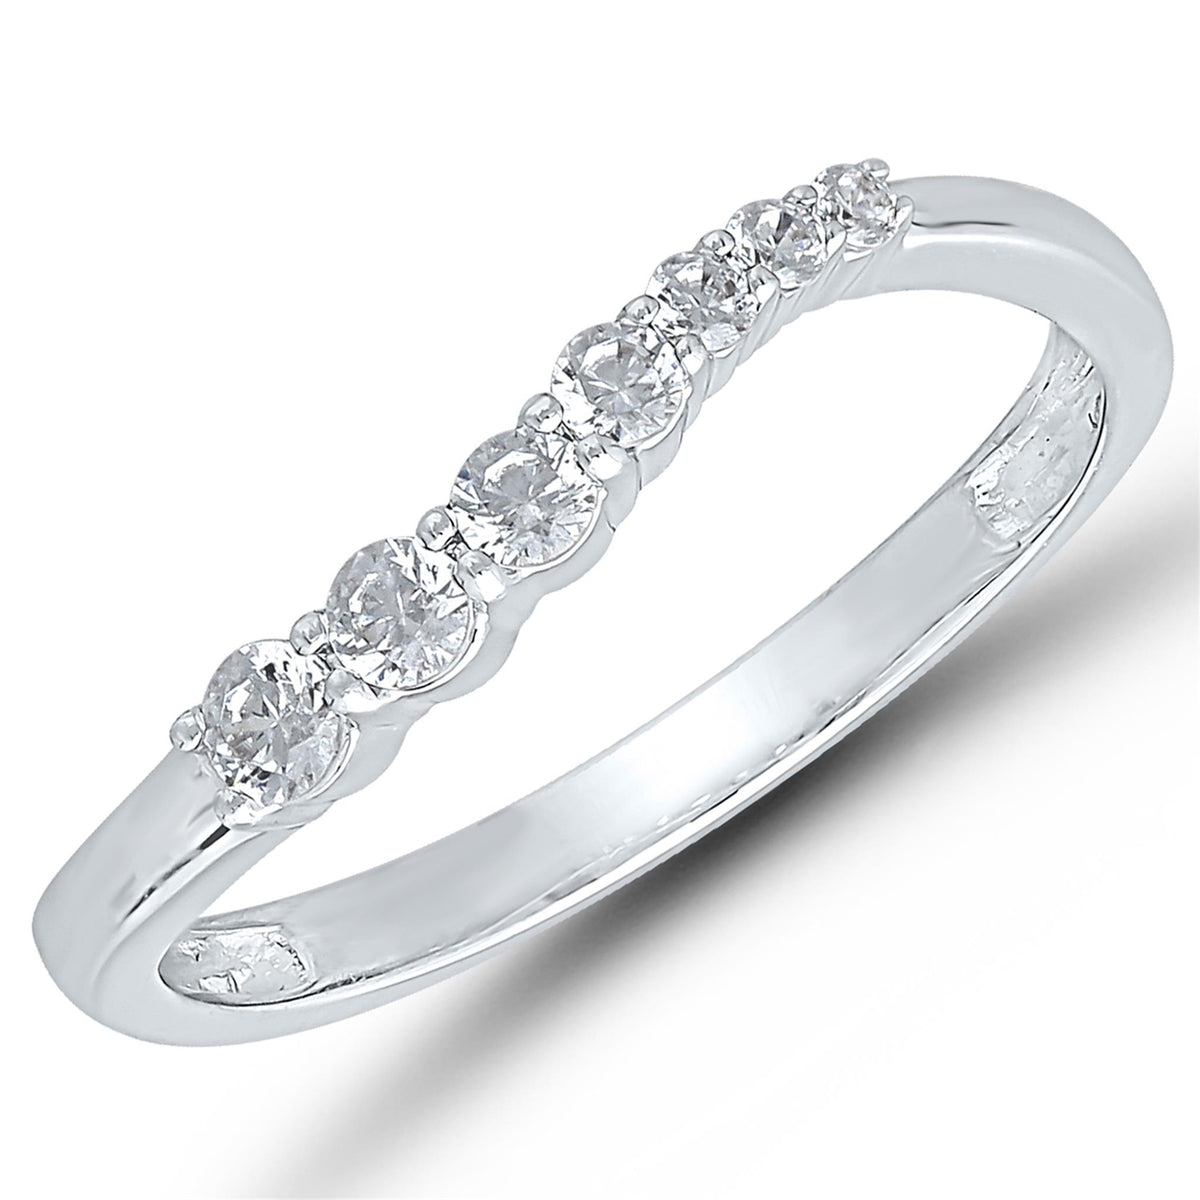 14Kt White Gold Journey Wedding Ring With 0.25cttw Natural Diamonds